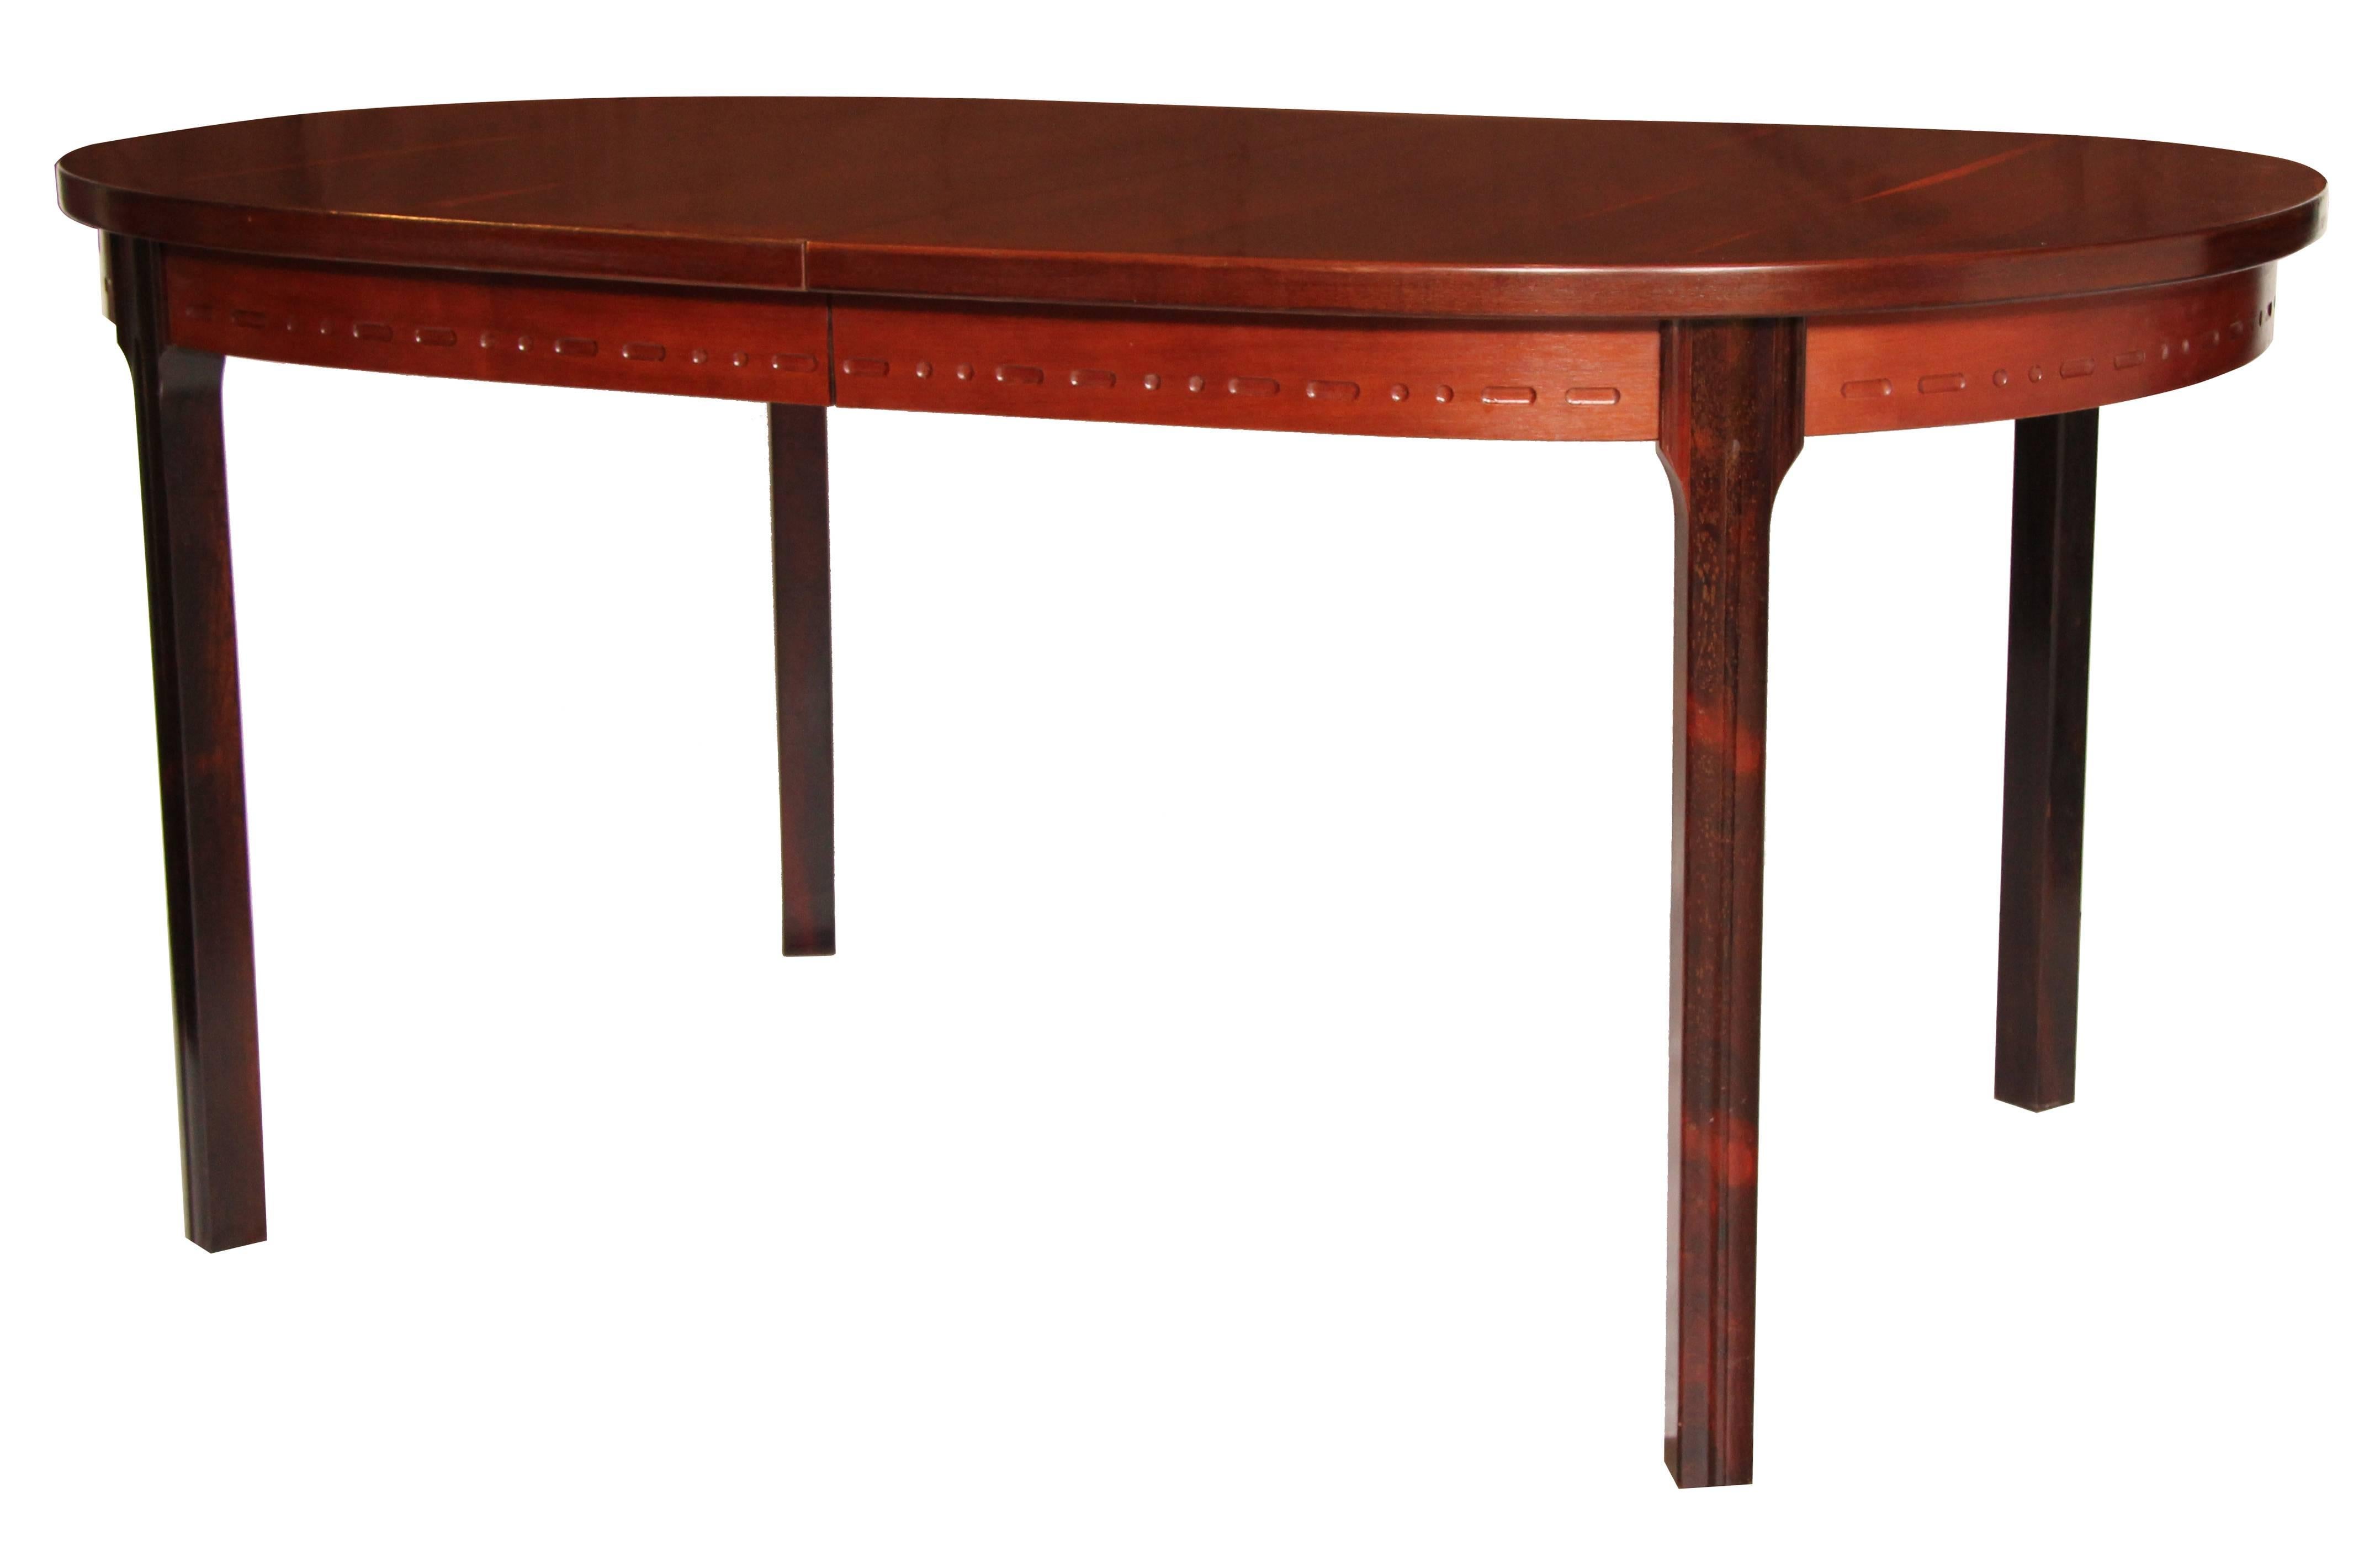 1960s Nils Jonsson for Troeds of Sweden rectangular extendable Rosewood dining table. The table has been completely restored and is in beautiful condition. The wood veneer tabletop has a wonderful grain which runs across the whole table. The table